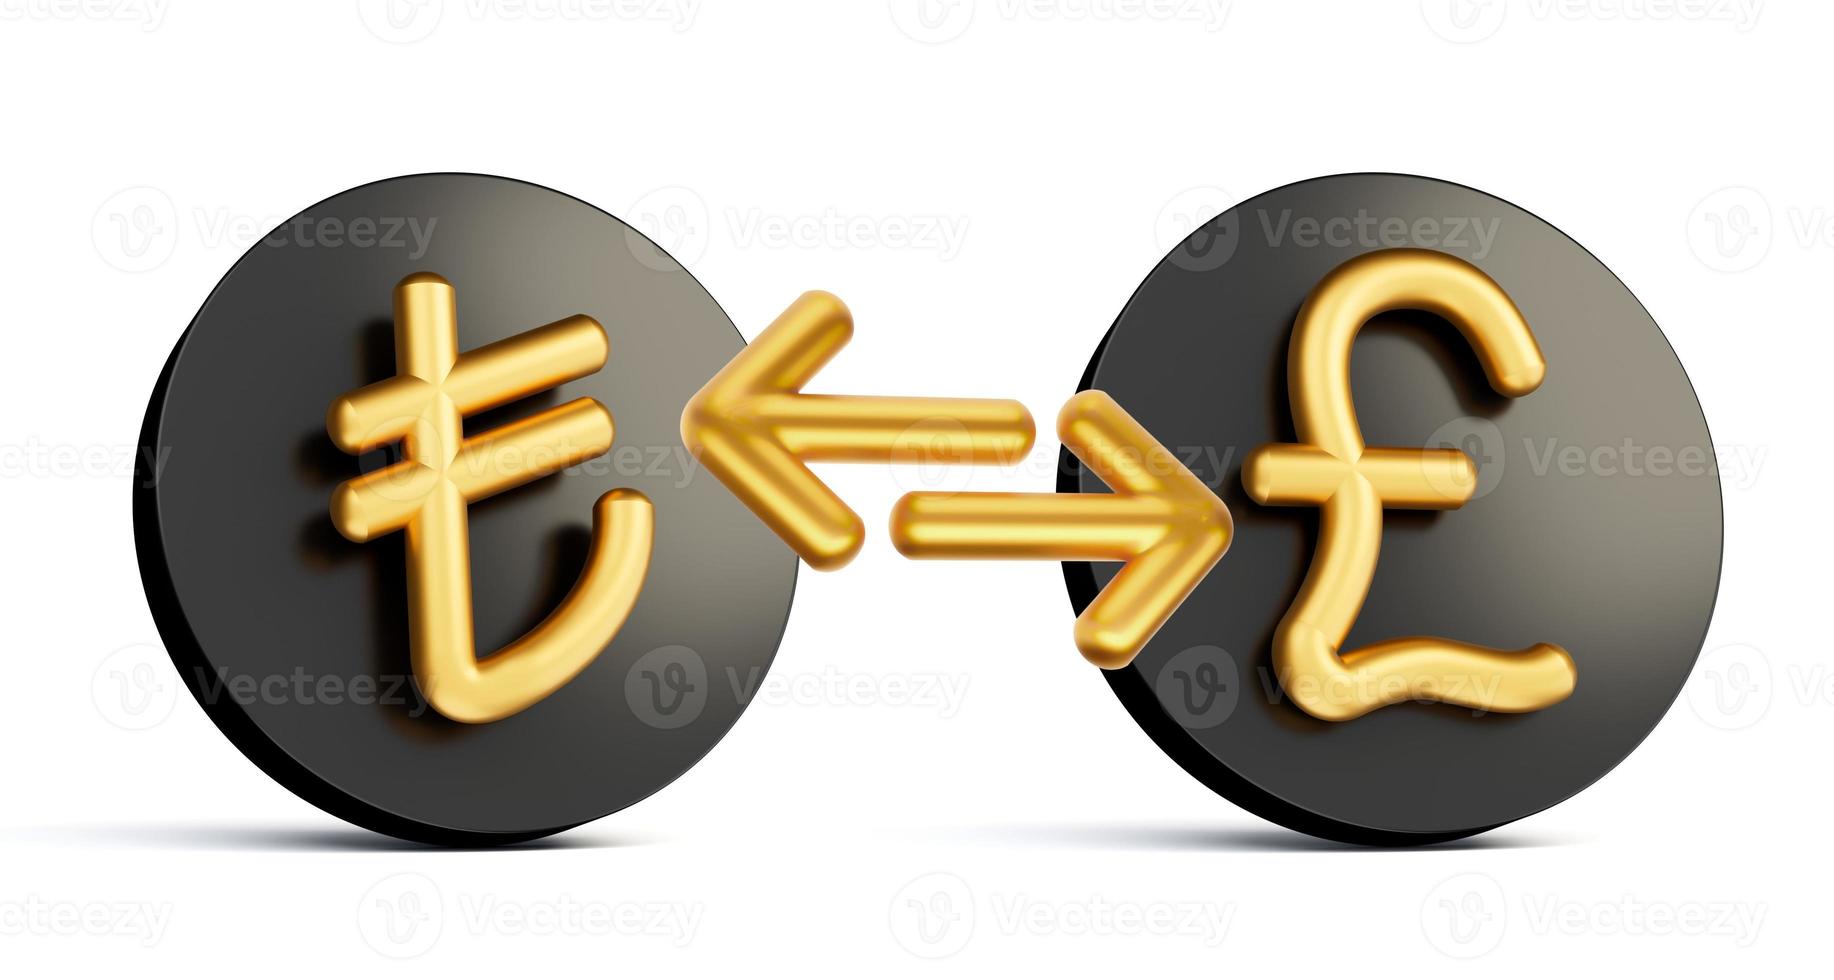 Gold Coin with Lira to Pound Currency exchange sign icon isolated on white. 3D illustration photo